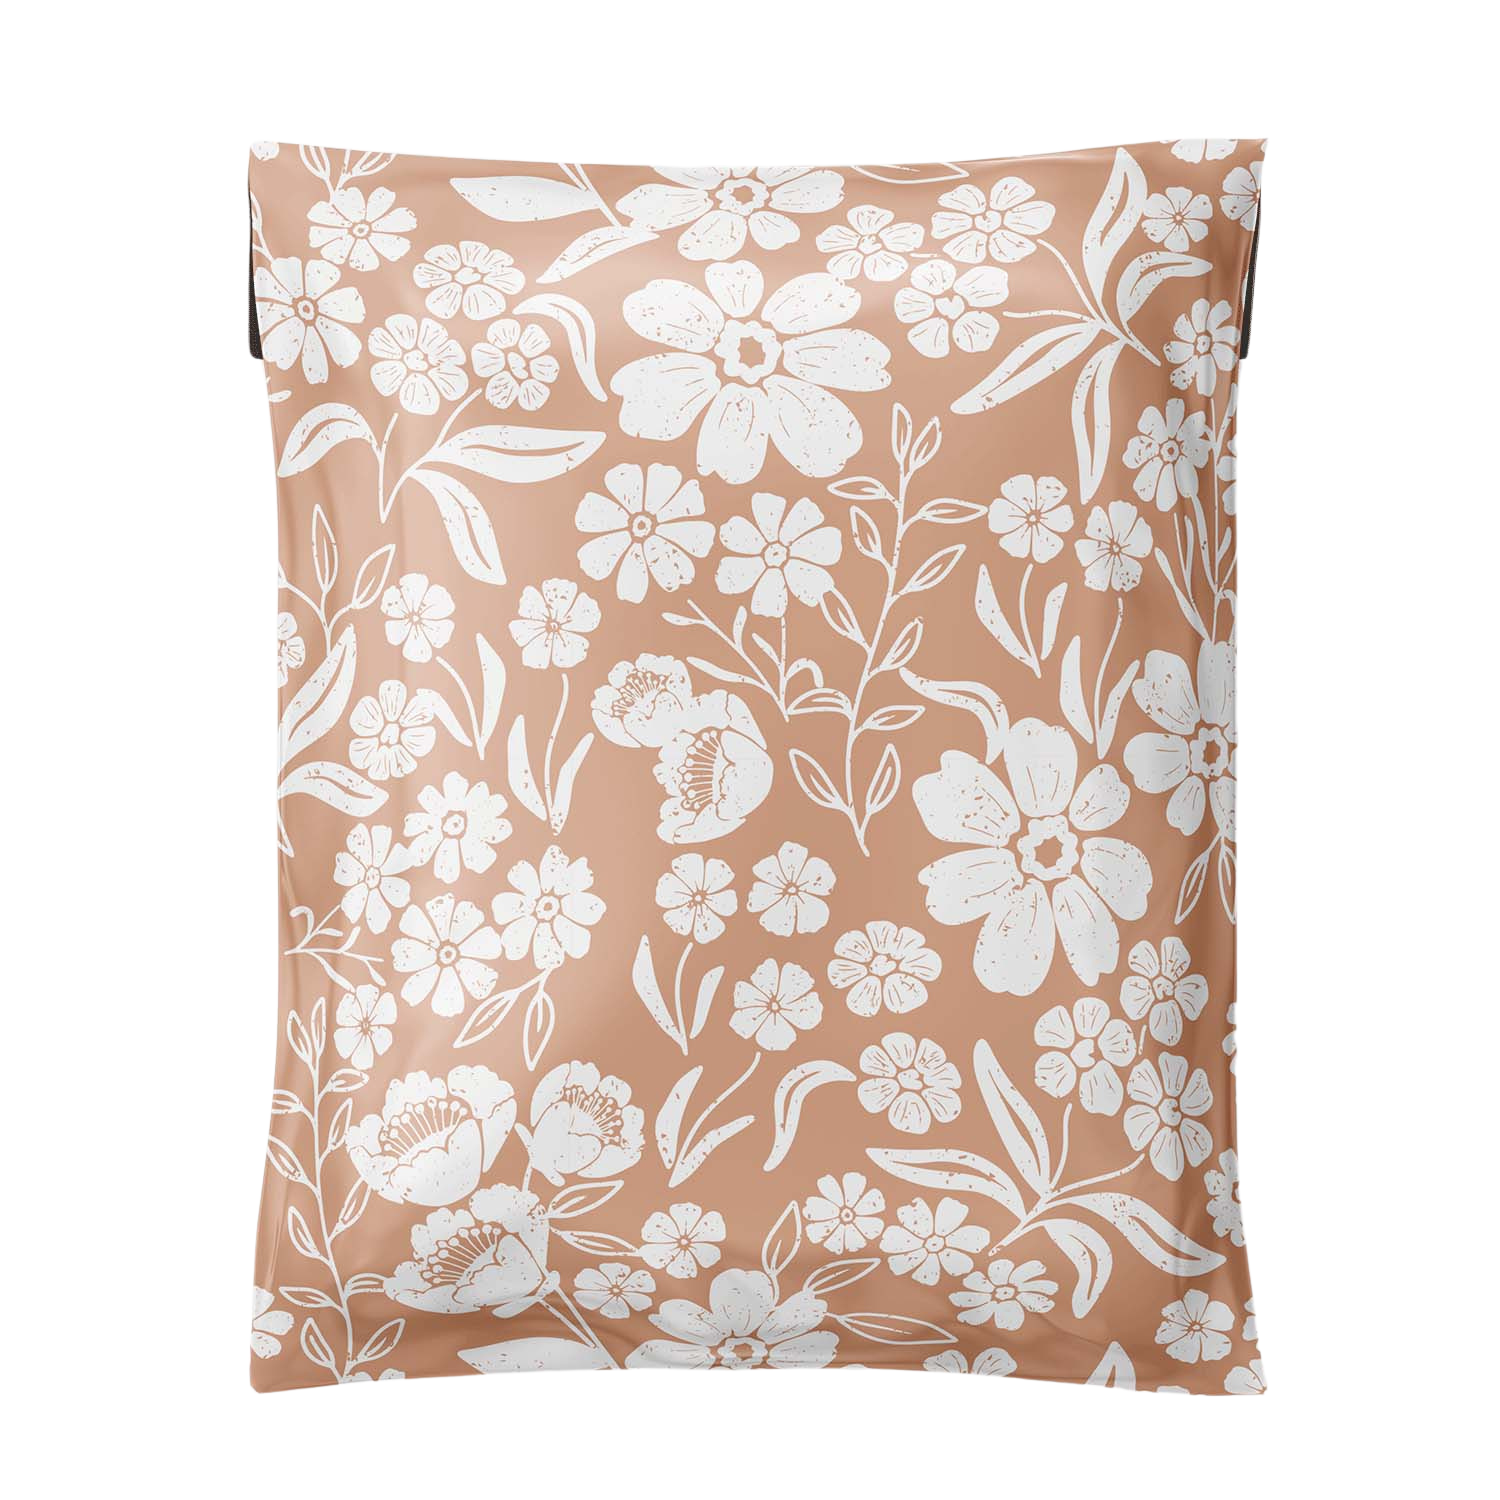 6x9 - PolyMailers: Floral Block Print (Dusty Pink) size small